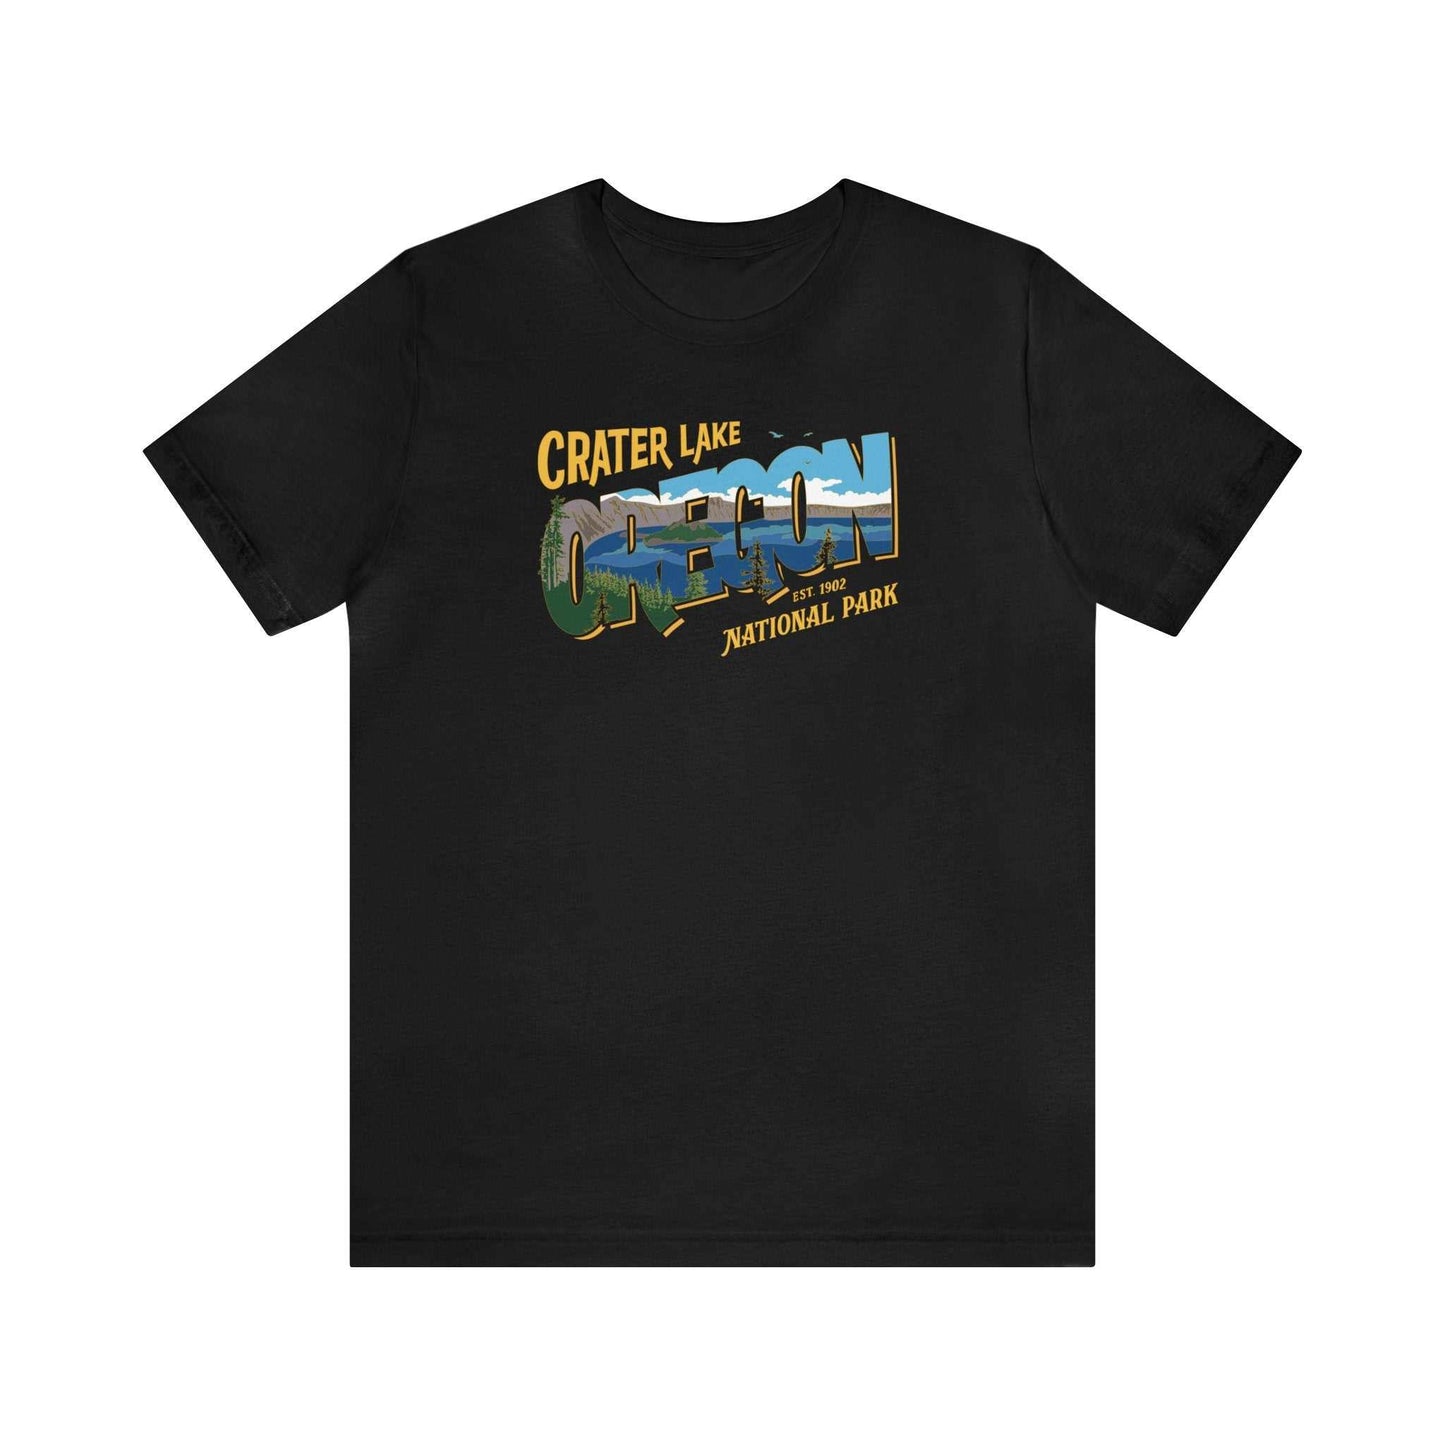 Crater Lake National Park ShirtRep your favorite park and state with this Crater Lake National Park of Oregon into your wardrobe. Featuring it's best feature, the famous Crater Lake.
Details:
- 10